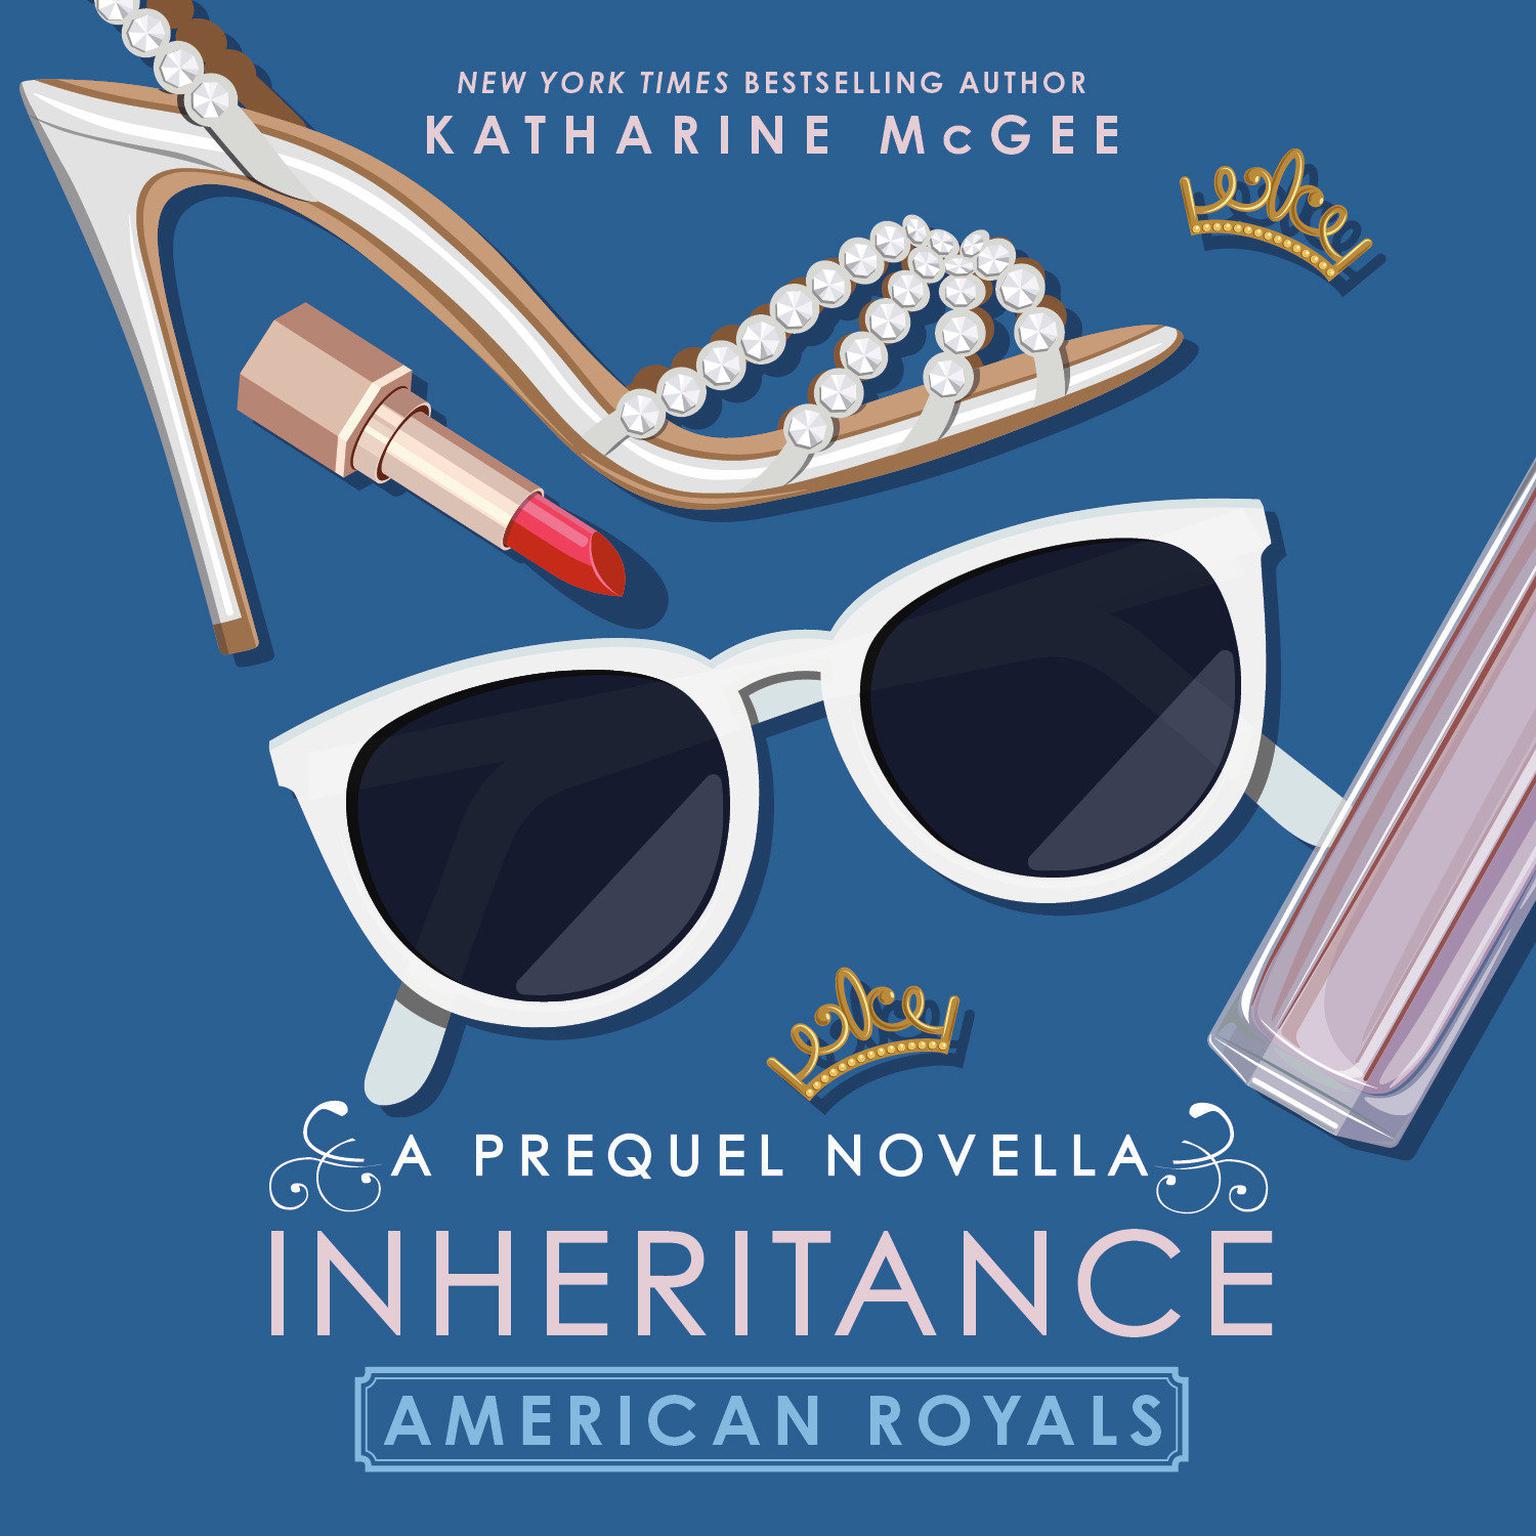 American Royals: Inheritance (A Prequel Novella) Audiobook, by Katharine McGee